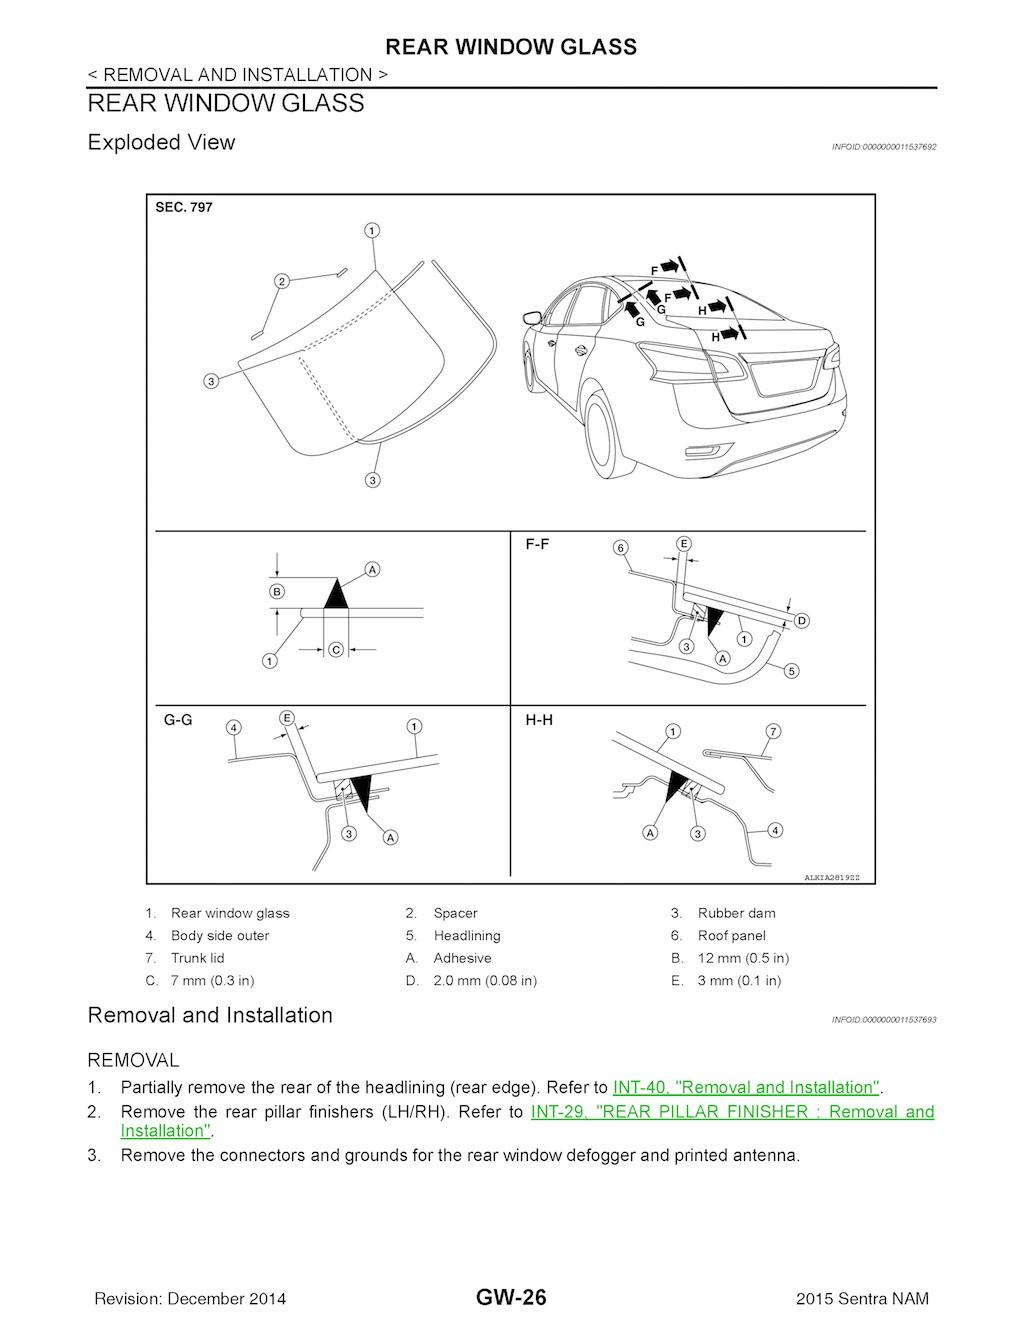 2015 Nissan Sentra Repair Manual, Rear Window Glass Removal and Installation